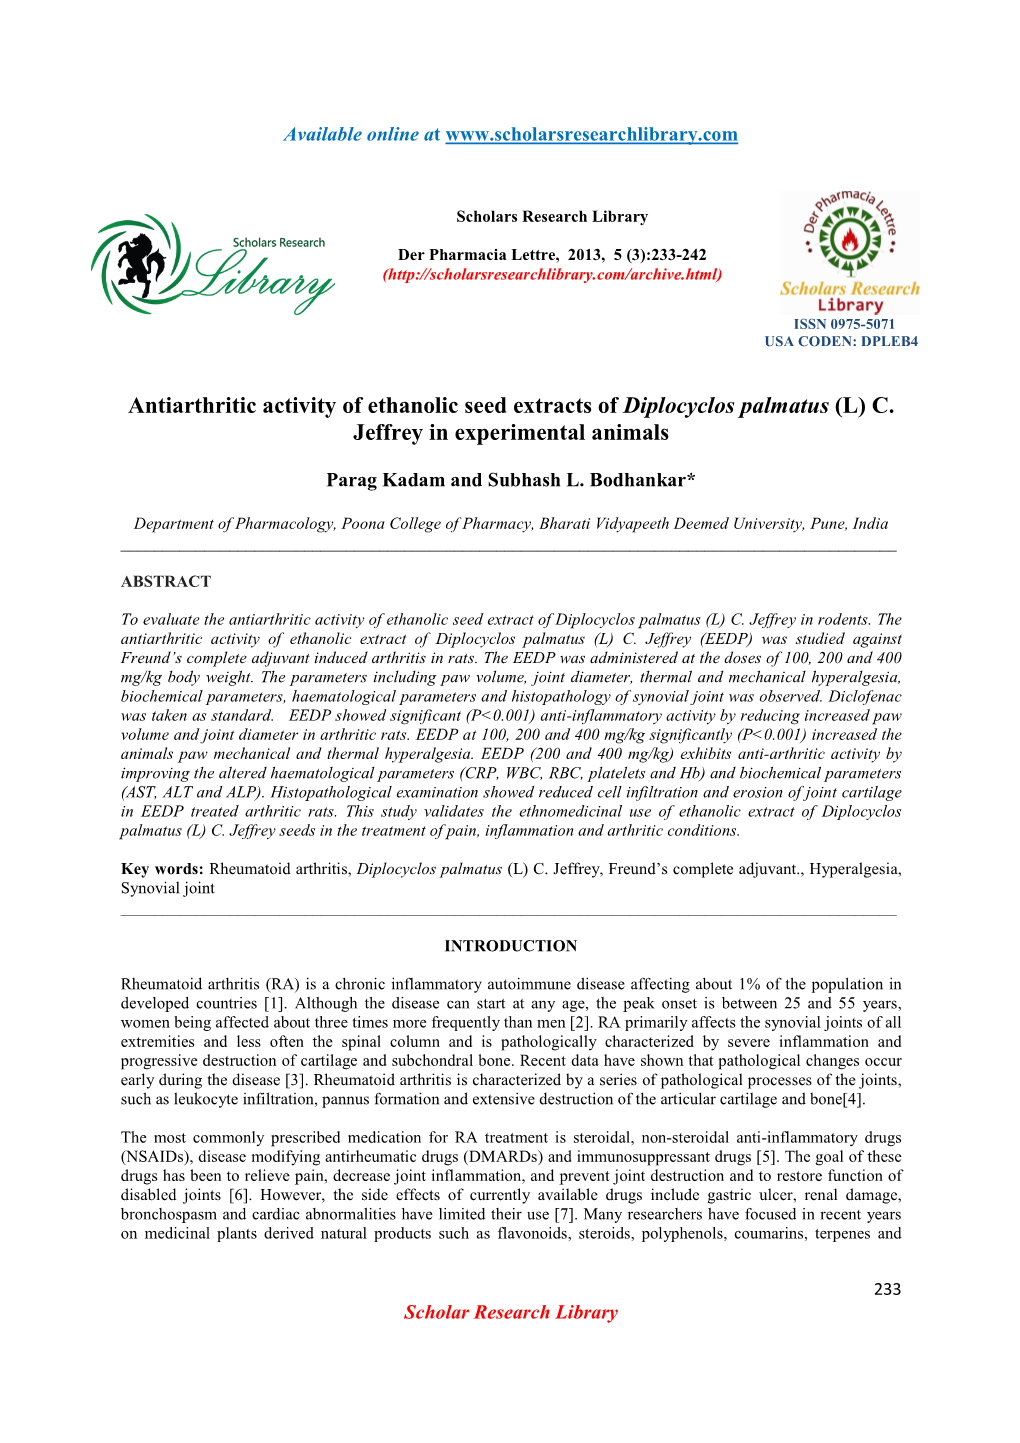 Antiarthritic Activity of Ethanolic Seed Extracts of Diplocyclos Palmatus (L) C